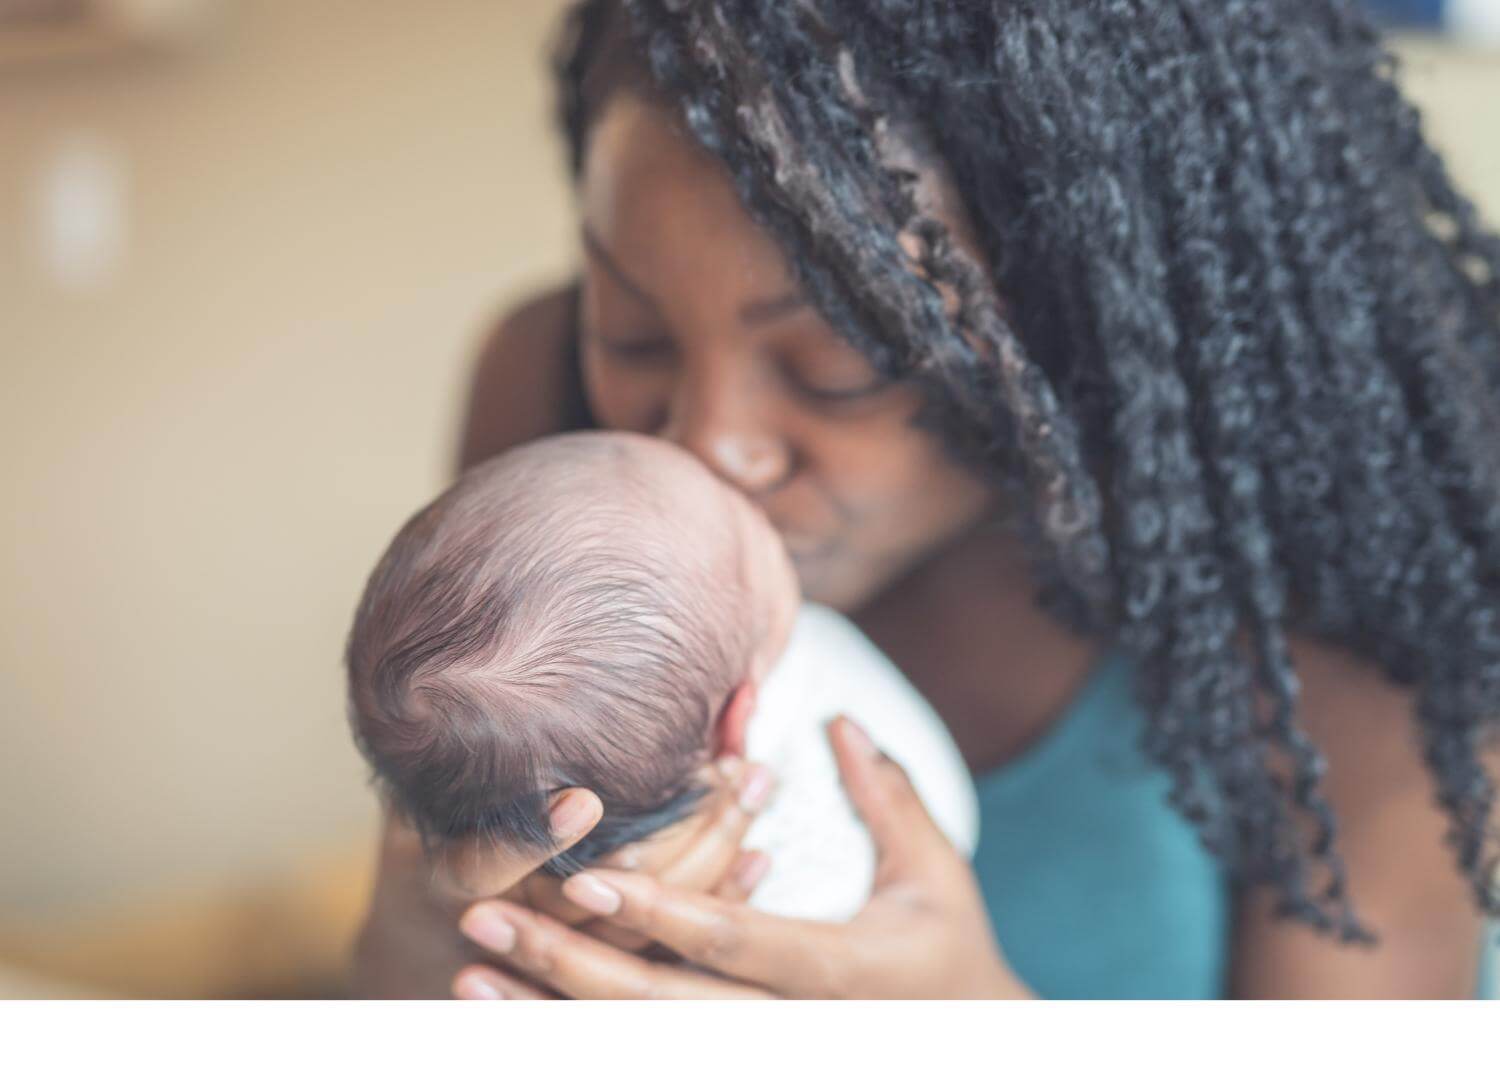 Woman of color with long hair, kissing newborn baby